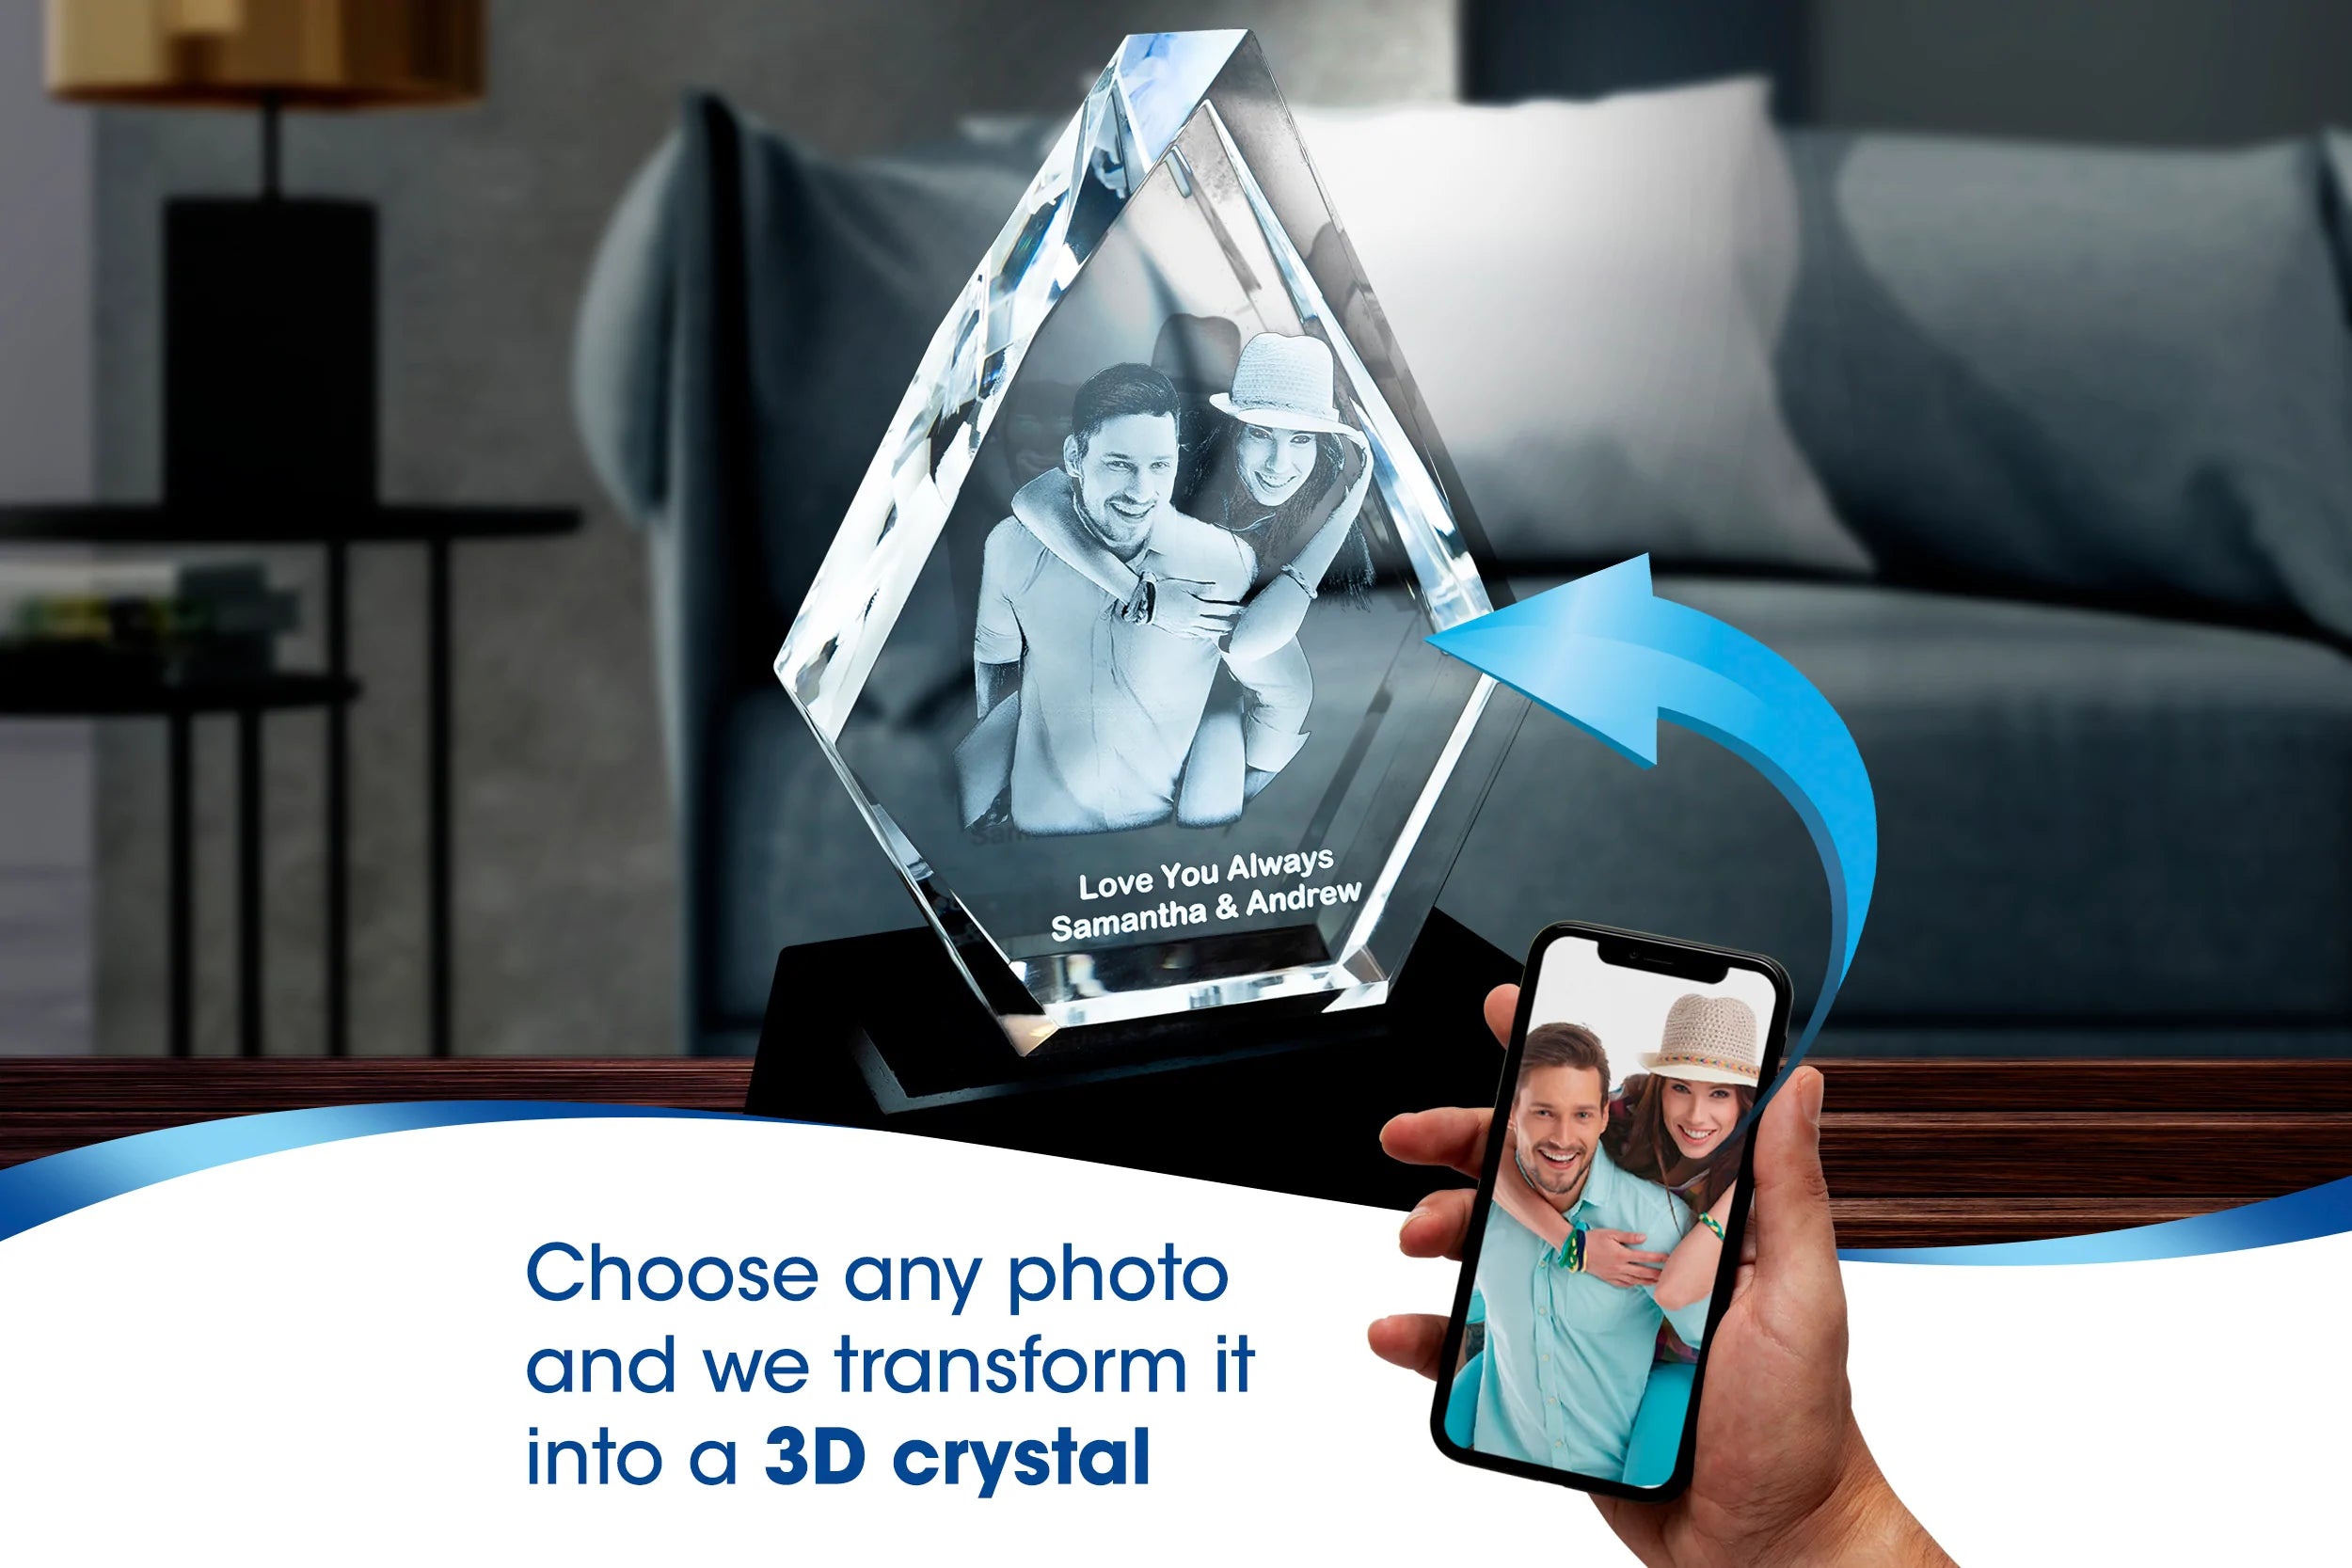 Amazon.com - MASTERPICS 3D 3D Photo Crystal Diamond - Personalized Crystal  Gifts With Your Own Photo. 3D Glass Picture